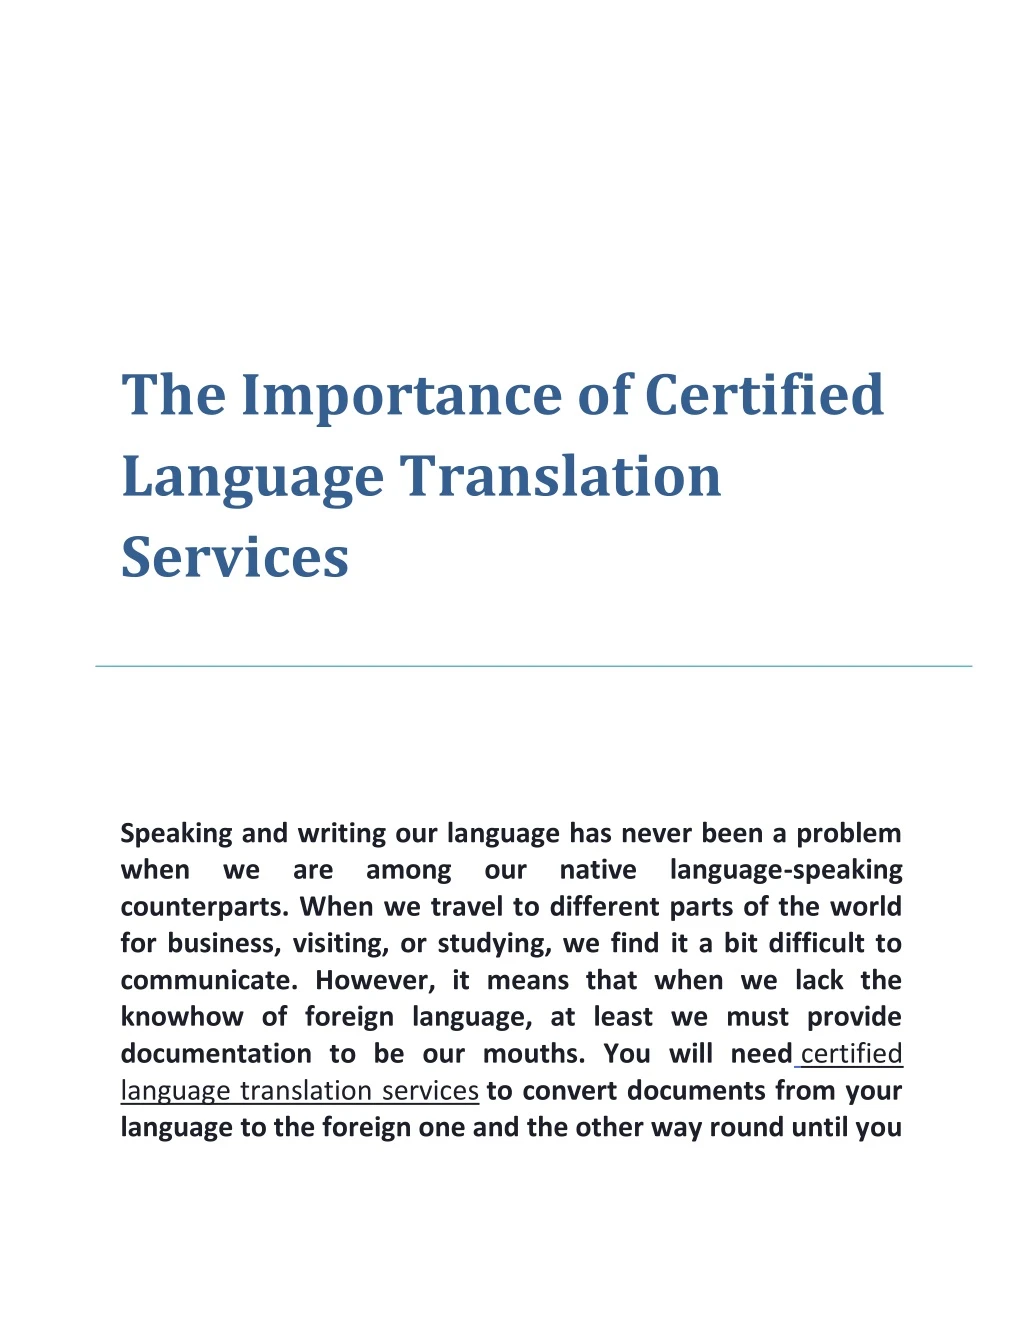 the importance of certified language translation